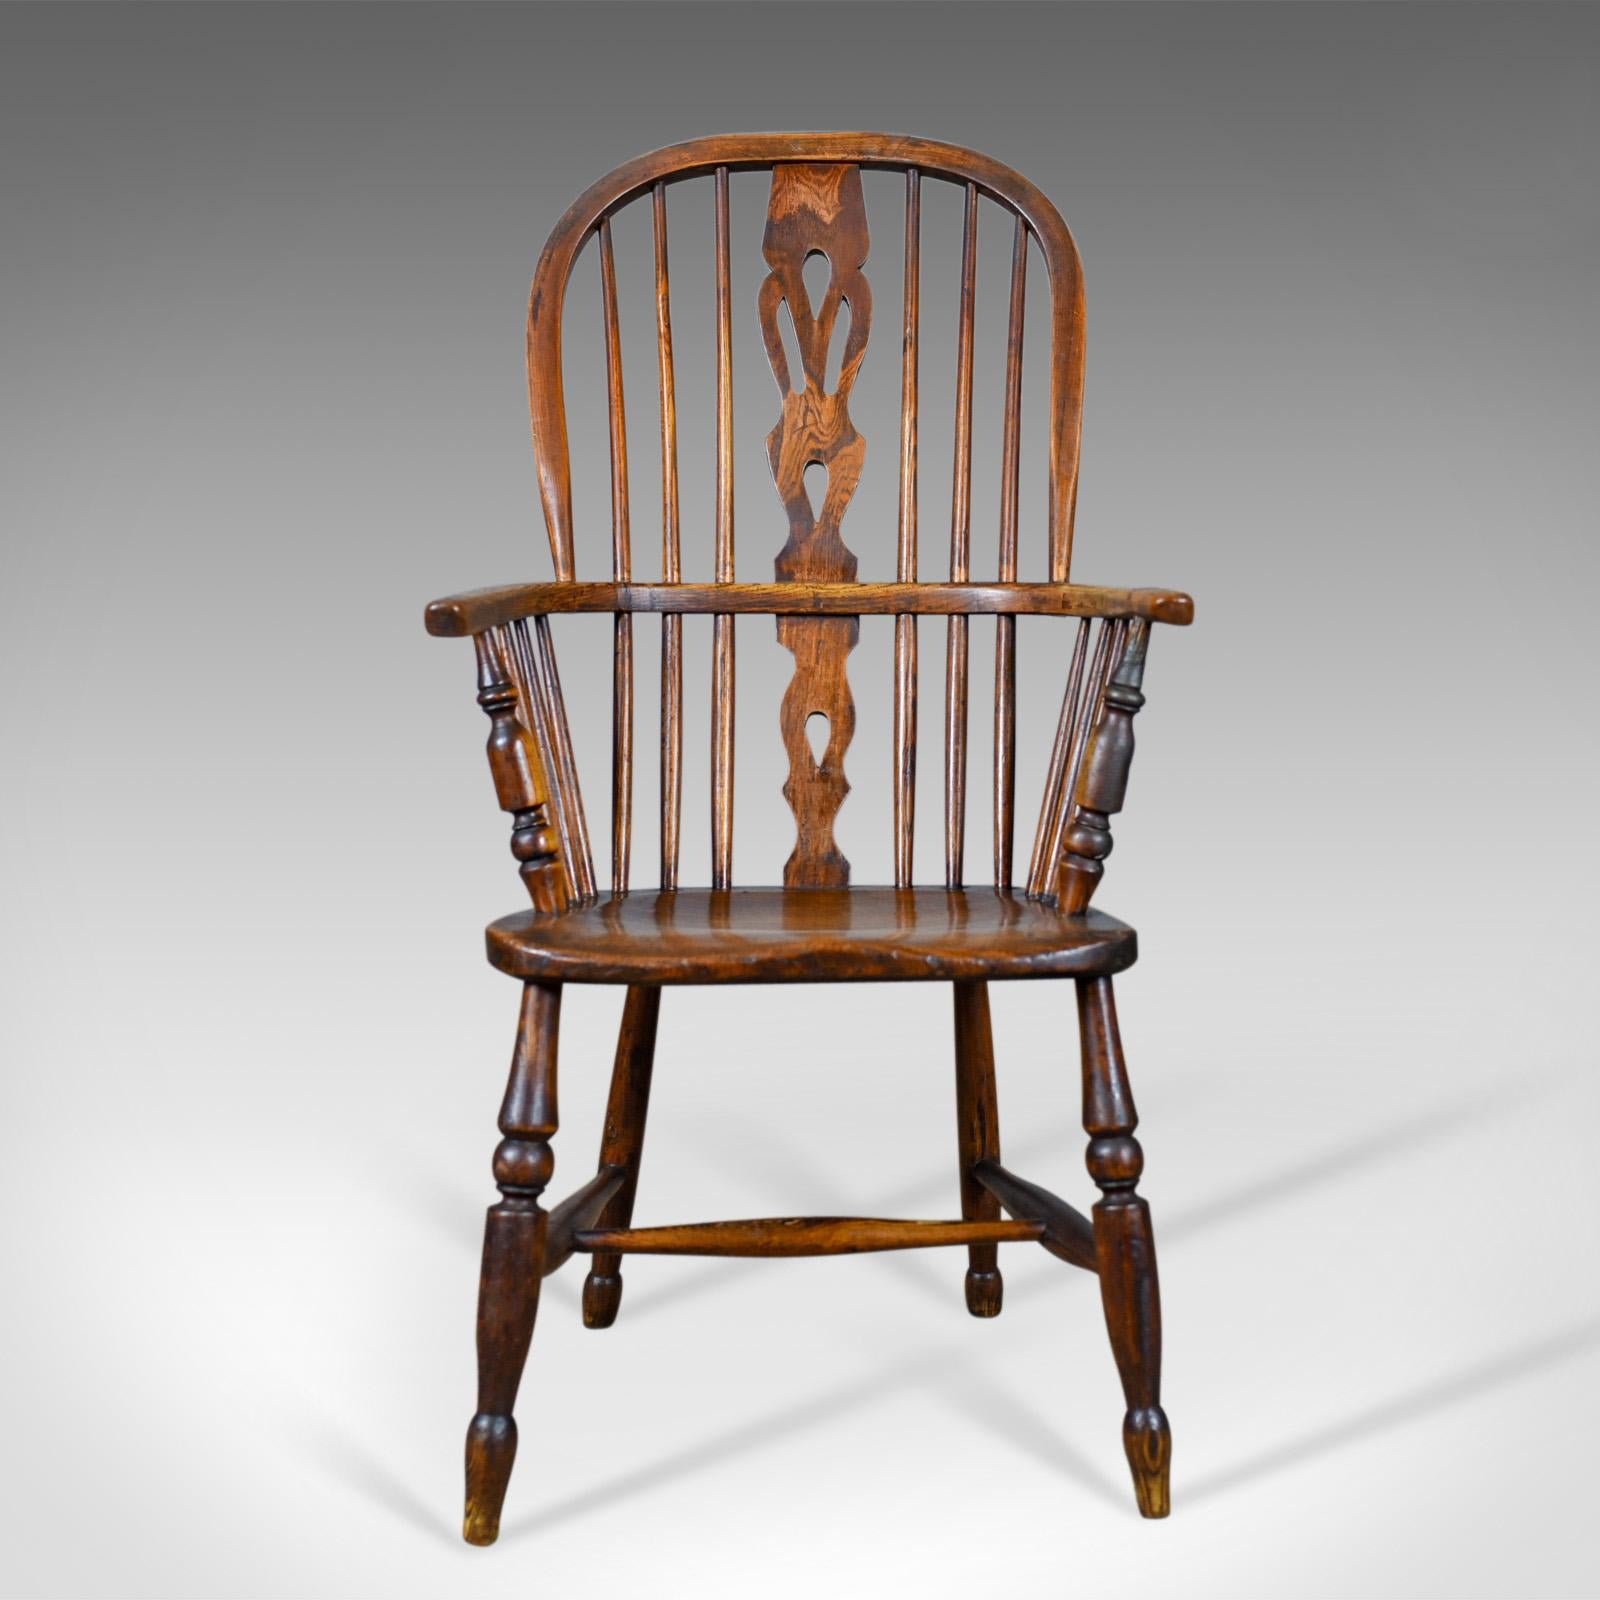 This is an antique Windsor armchair, an English Victorian, country kitchen, stick back elbow chair in elm and ash dating to circa 1860.

Stunning chair in fine order throughout
Classic pierced back splat above and below the arm bow
Raked,